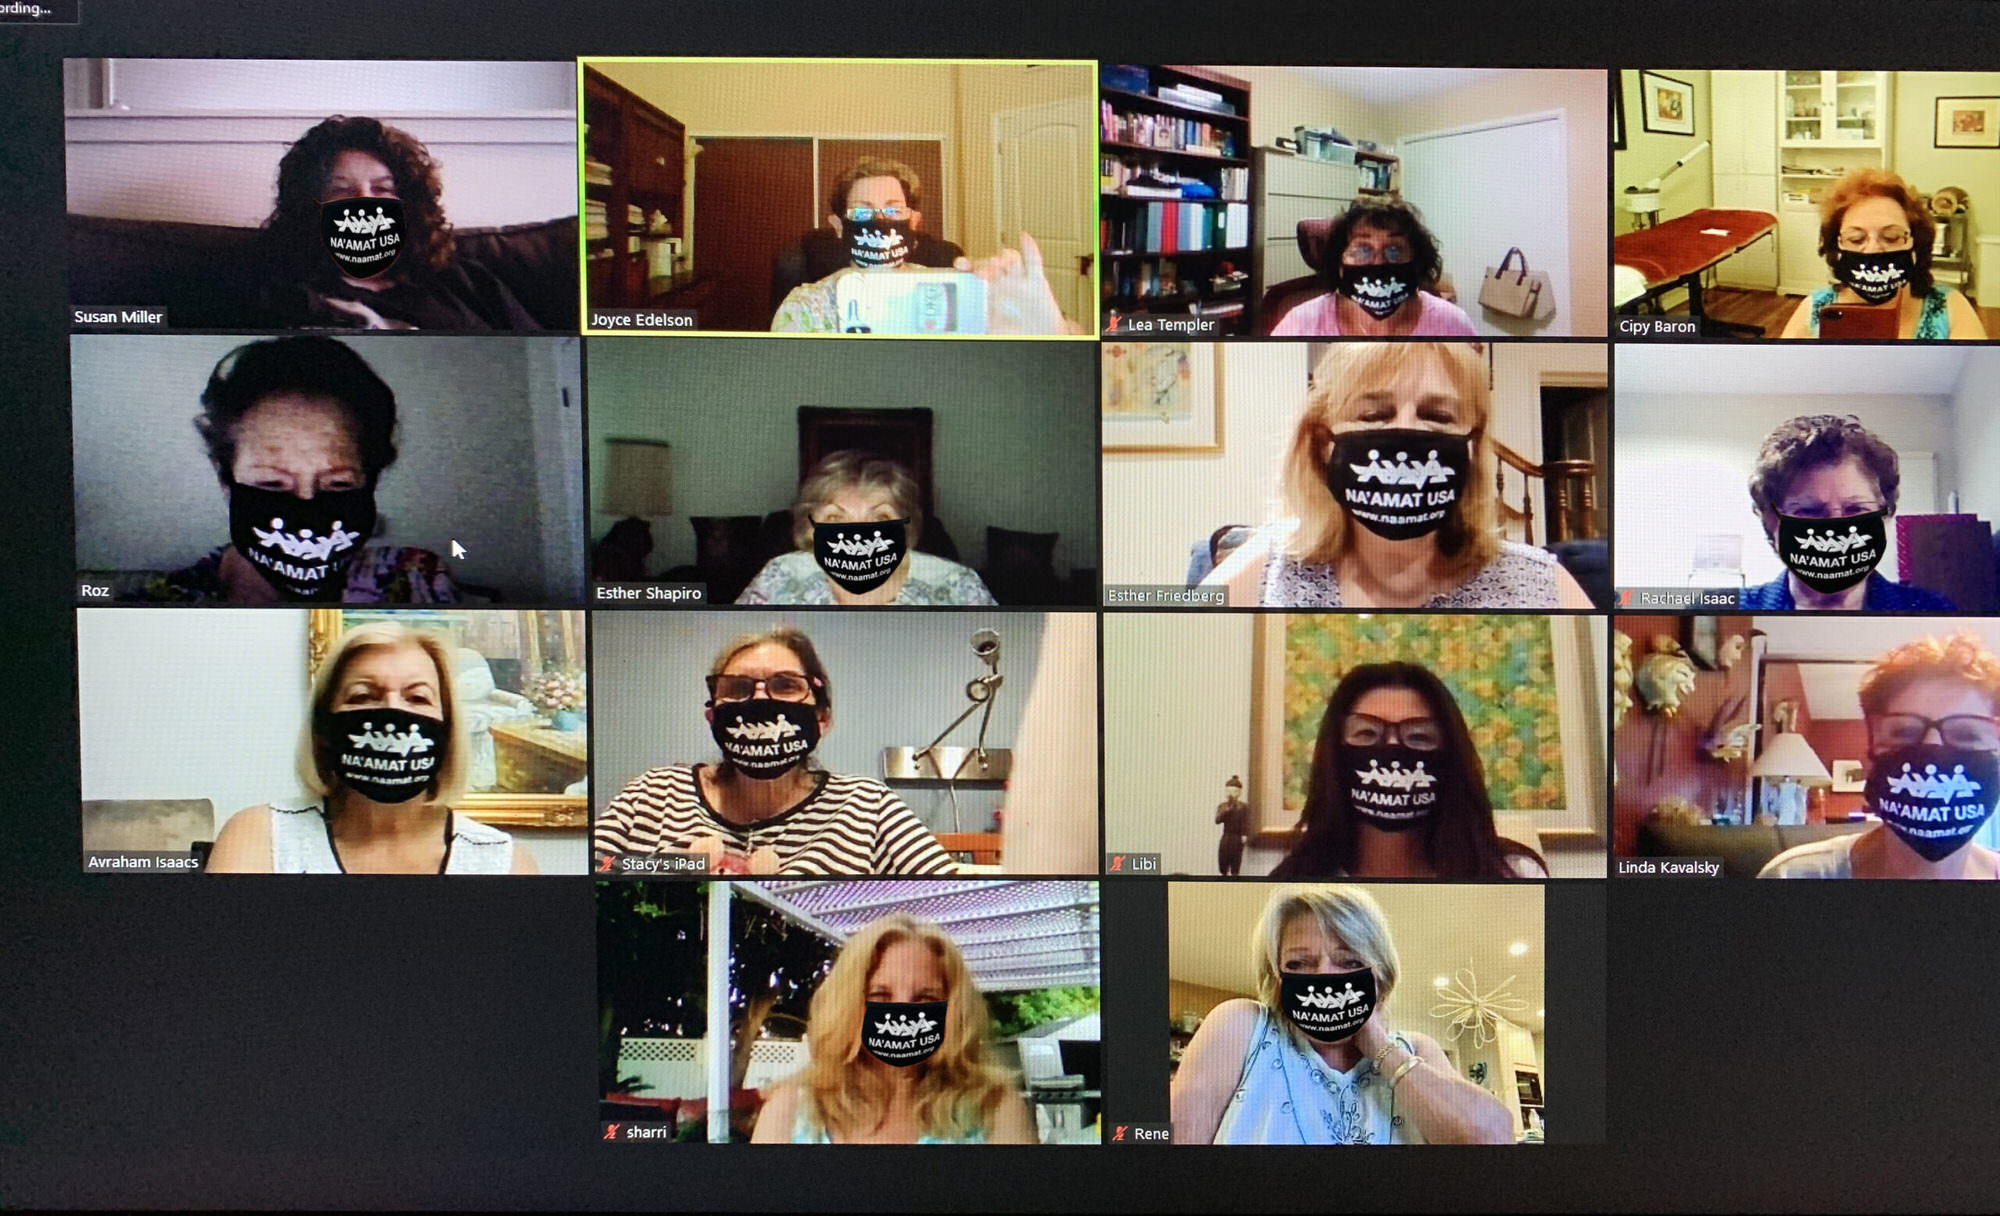 Having a board meeting over zoom, wearing NA'AMAT masks